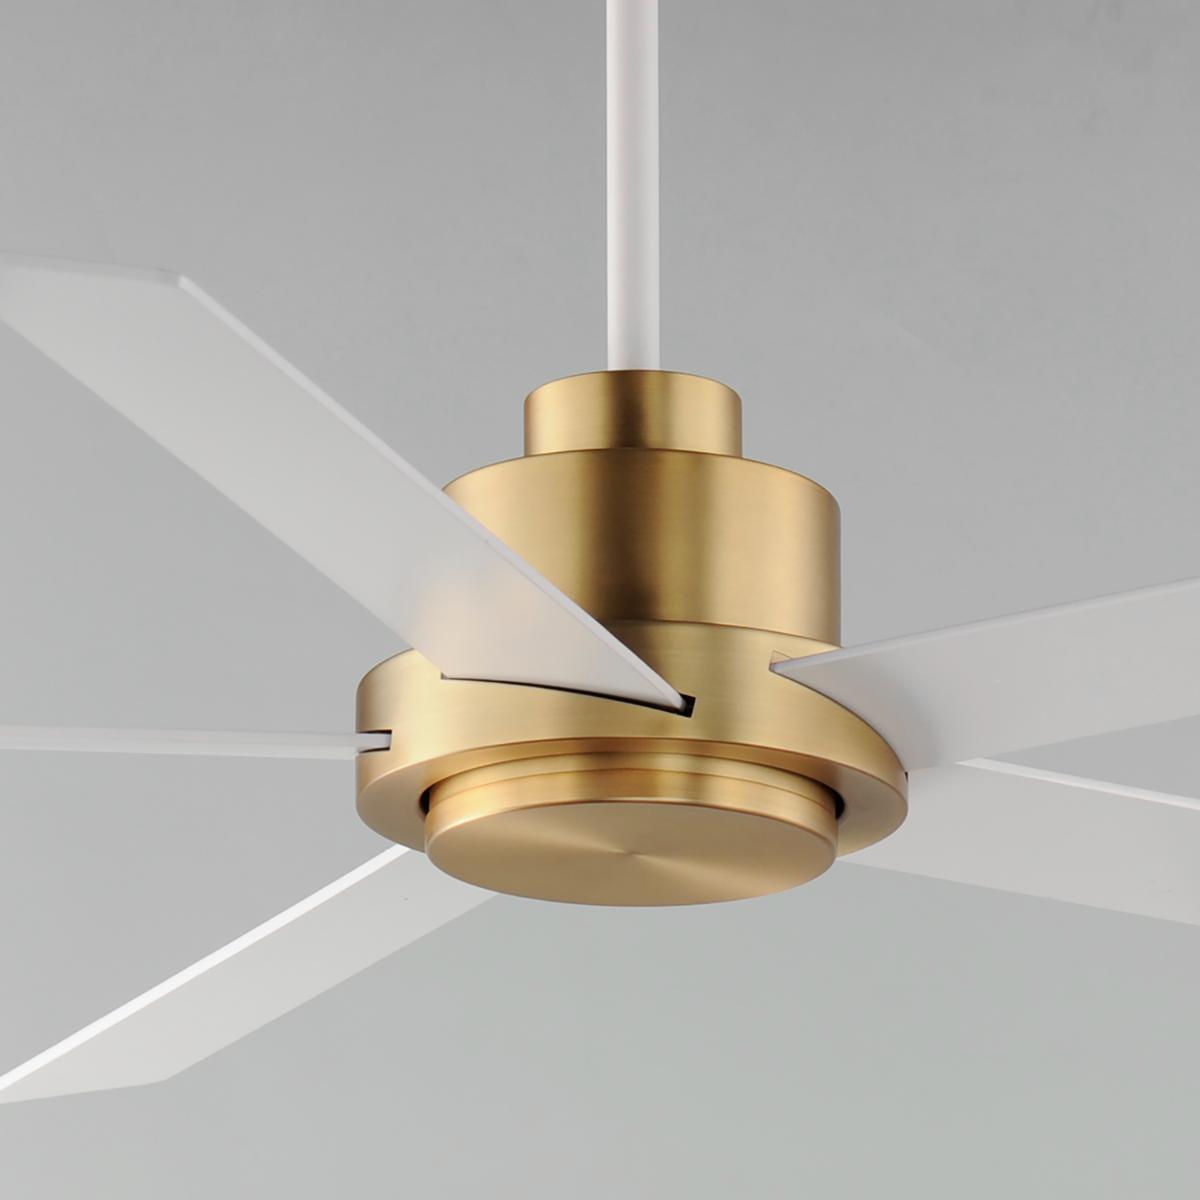 Daisy 60 Inch 5-Blade Ceiling Fan With Light and Wall Control, White,Natural Aged Brass with Matte White Blades - Bees Lighting